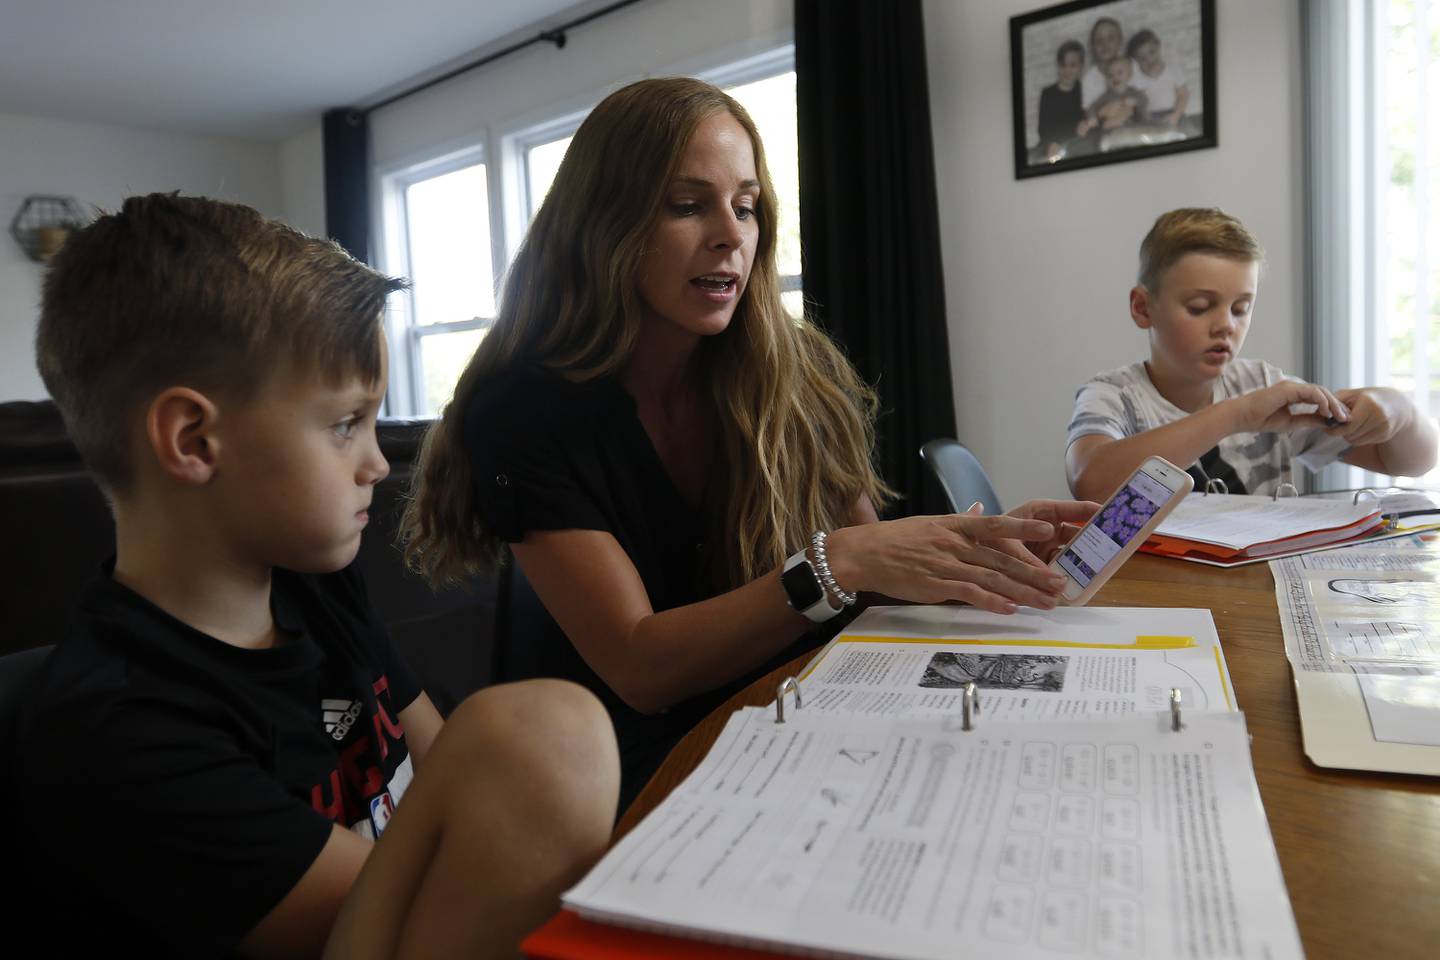 Jessica Clements helps her sons Gavin, 7, left, and Myles, 10, during a homeschool session with learning materials from The Good and The Beautiful at home on Tuesday, Aug. 17, 2021 in McHenry.  This is the family's first time trying home schooling.  Myles is in 5th grade, Gavin is in 2nd, and Dayne, 4, is in preschool.